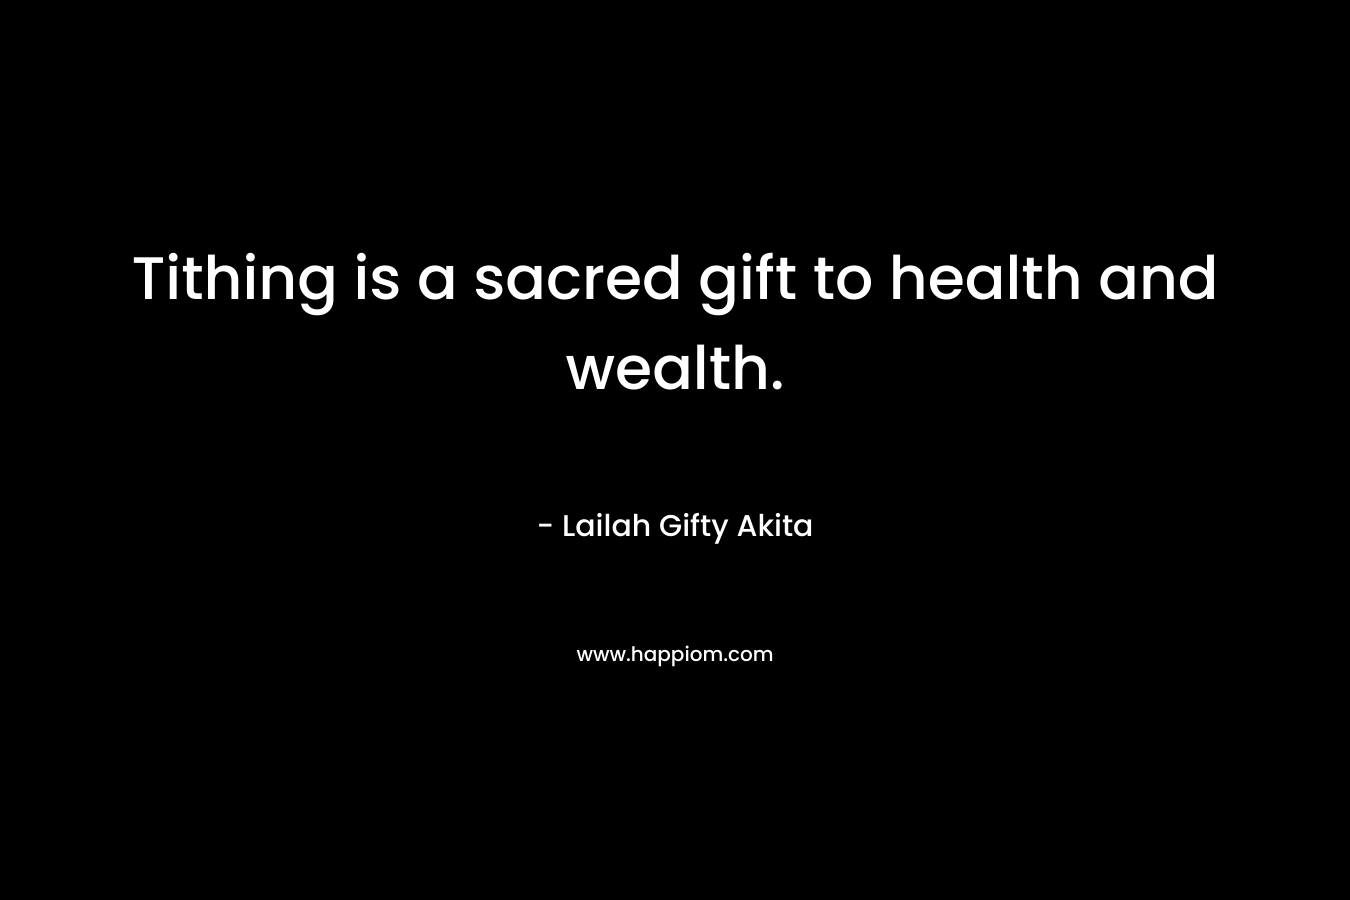 Tithing is a sacred gift to health and wealth. – Lailah Gifty Akita